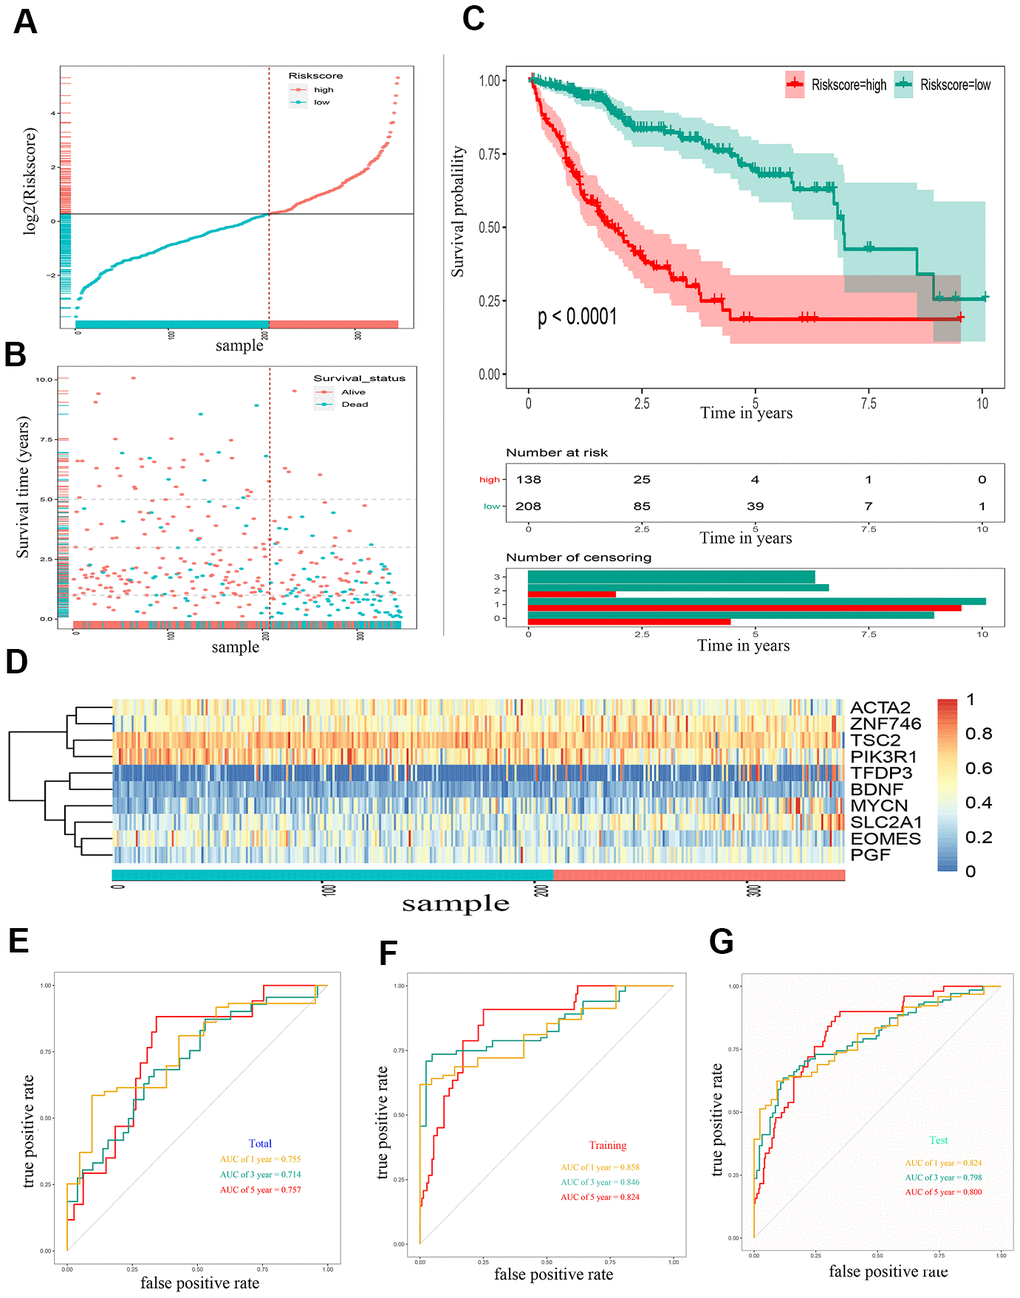 Construction of a 10 gene based EMT-related prognostic signature for HCC in TCGA-LIHC cohort. (A) The risk score distribution of HCC patients in TCGA-LIHC cohorts. (B) Duration and survival status of HCC patients. (C) Kaplan-Meier analysis of ten-gene signature in TCGA-LIHC cohort. (D) Heatmaps of the ten gene signature relative expression. (E) Time-dependent ROC analysis of ten-gene signature in training set. (F) Time-dependent ROC analysis of ten-gene signature in testing set. (G) Time-dependent ROC analysis of ten-gene signature in total cohort. HCC, hepatocellular carcinoma; TCGA, The Cancer Genome Atlas; ROC, receiver operating characteristic curve.